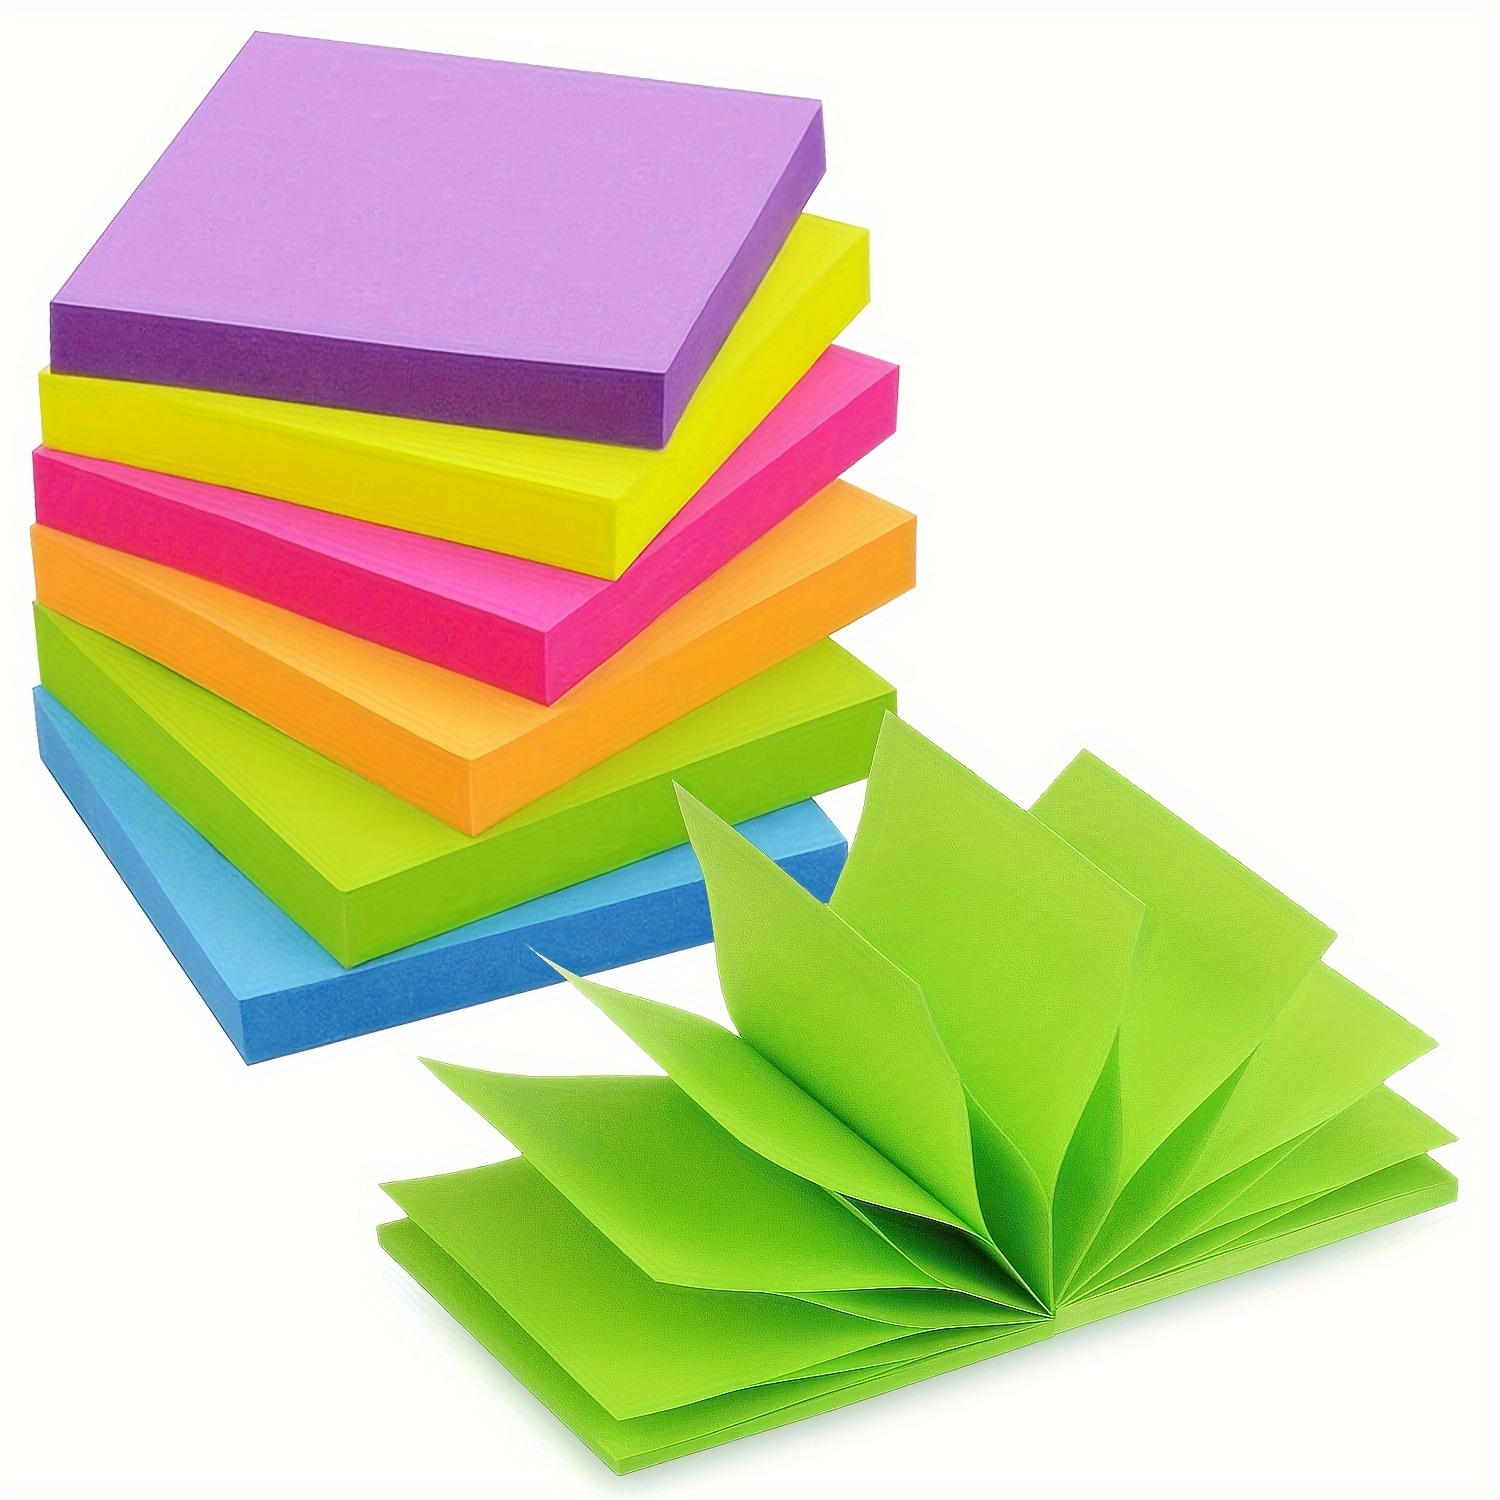 6PacksSet Posted It Transparent Sticky Notes Self-Adhesive